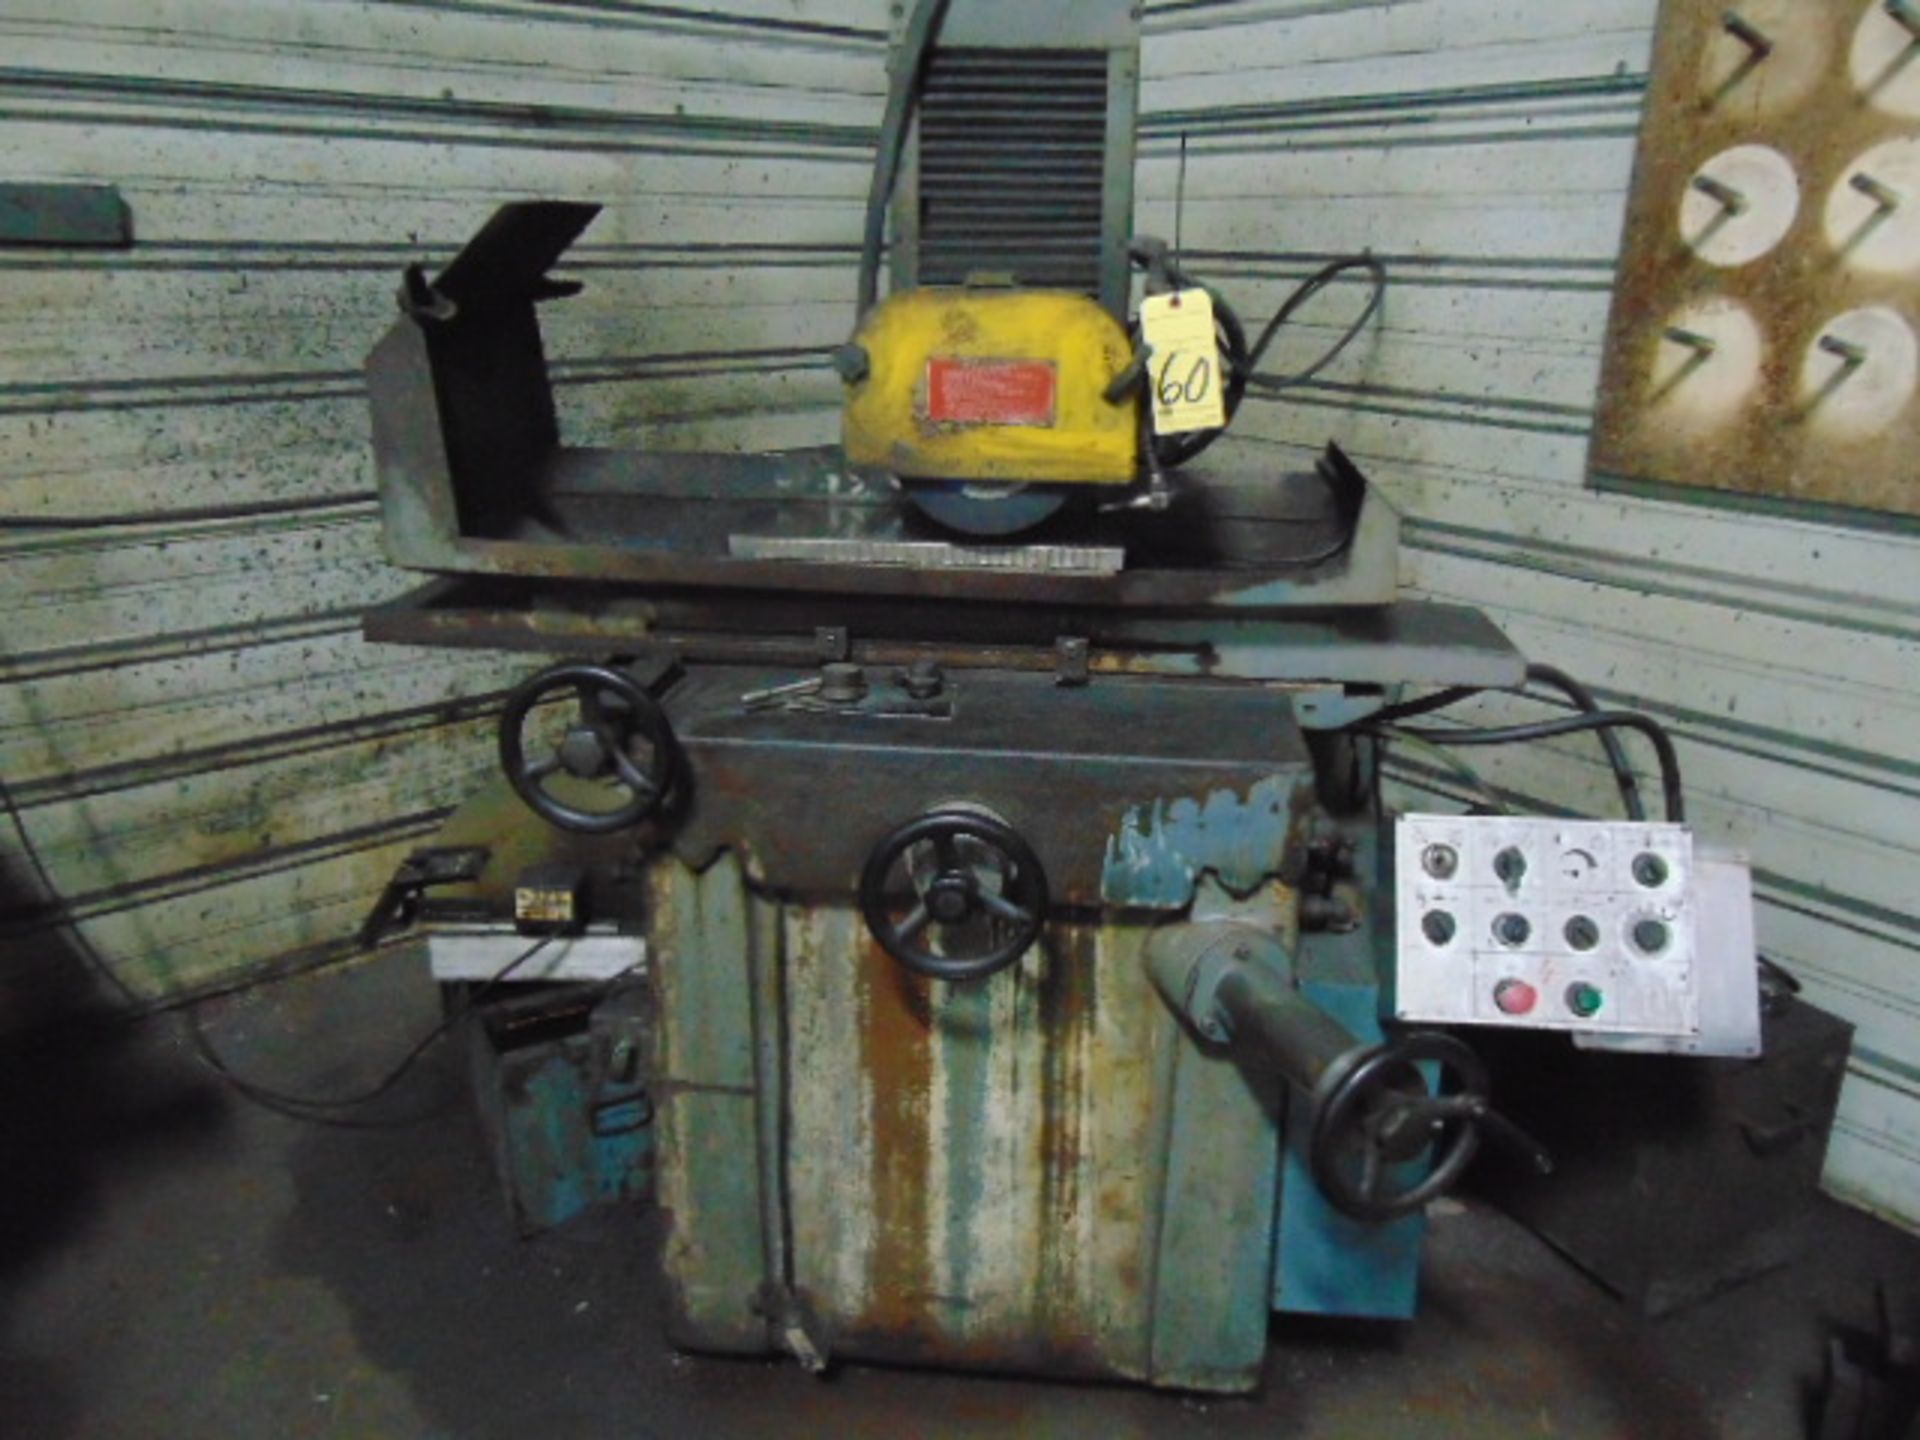 HYDRAULIC SURFACE GRINDER, PROTH MDL. PSGS-25550AH, new 1984, 10” x 19-1/2” electromagnetic magnetic